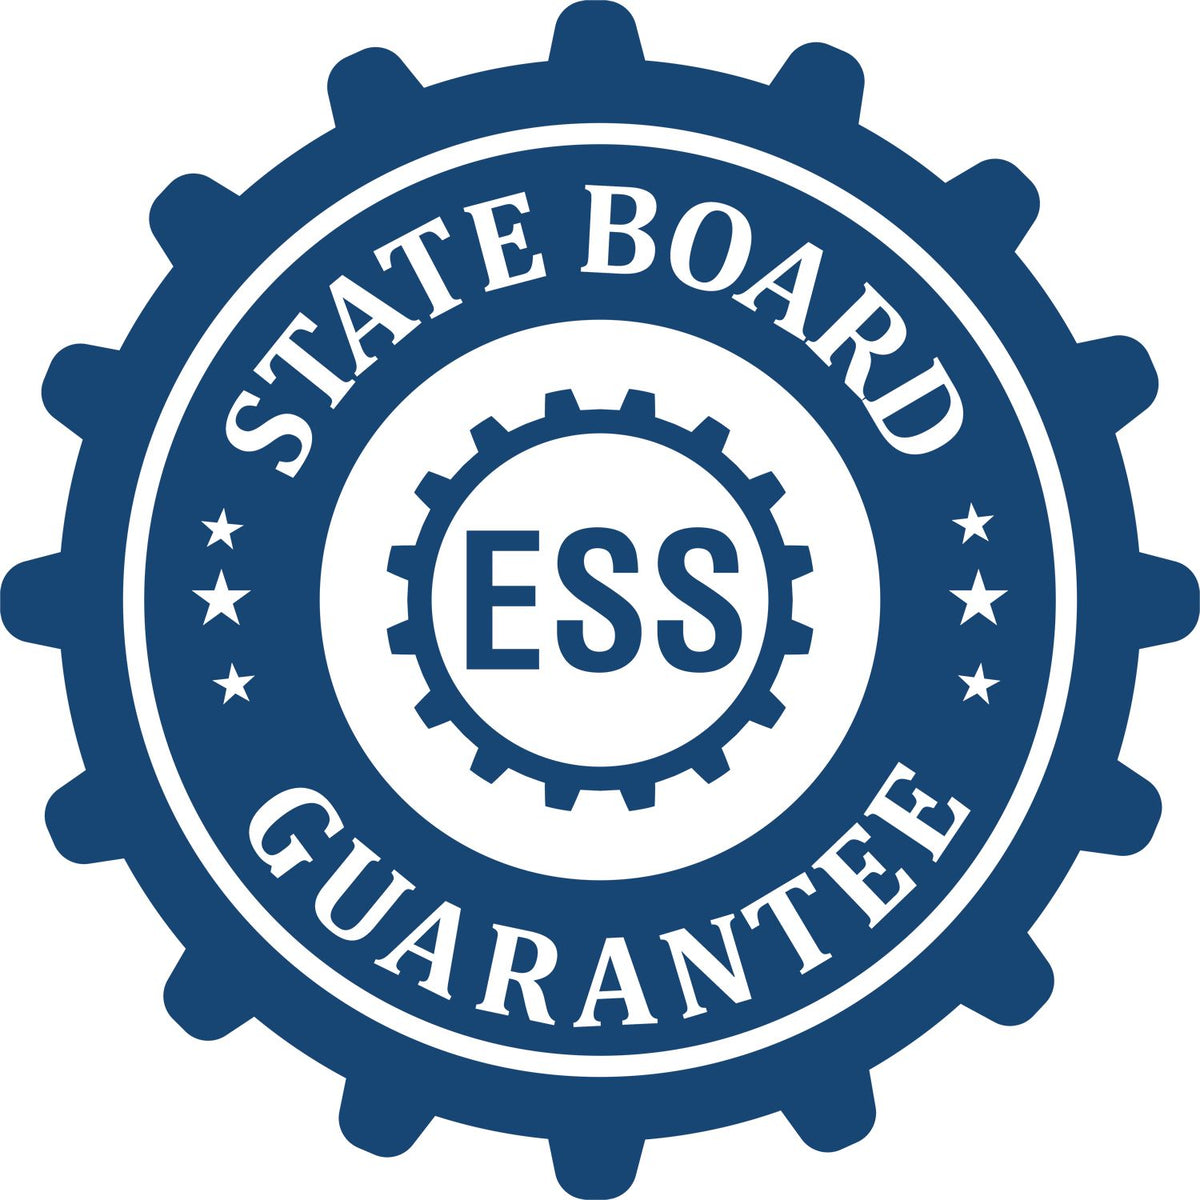 An emblem in a gear shape illustrating a state board guarantee for the State of Maryland Long Reach Architectural Embossing Seal product.